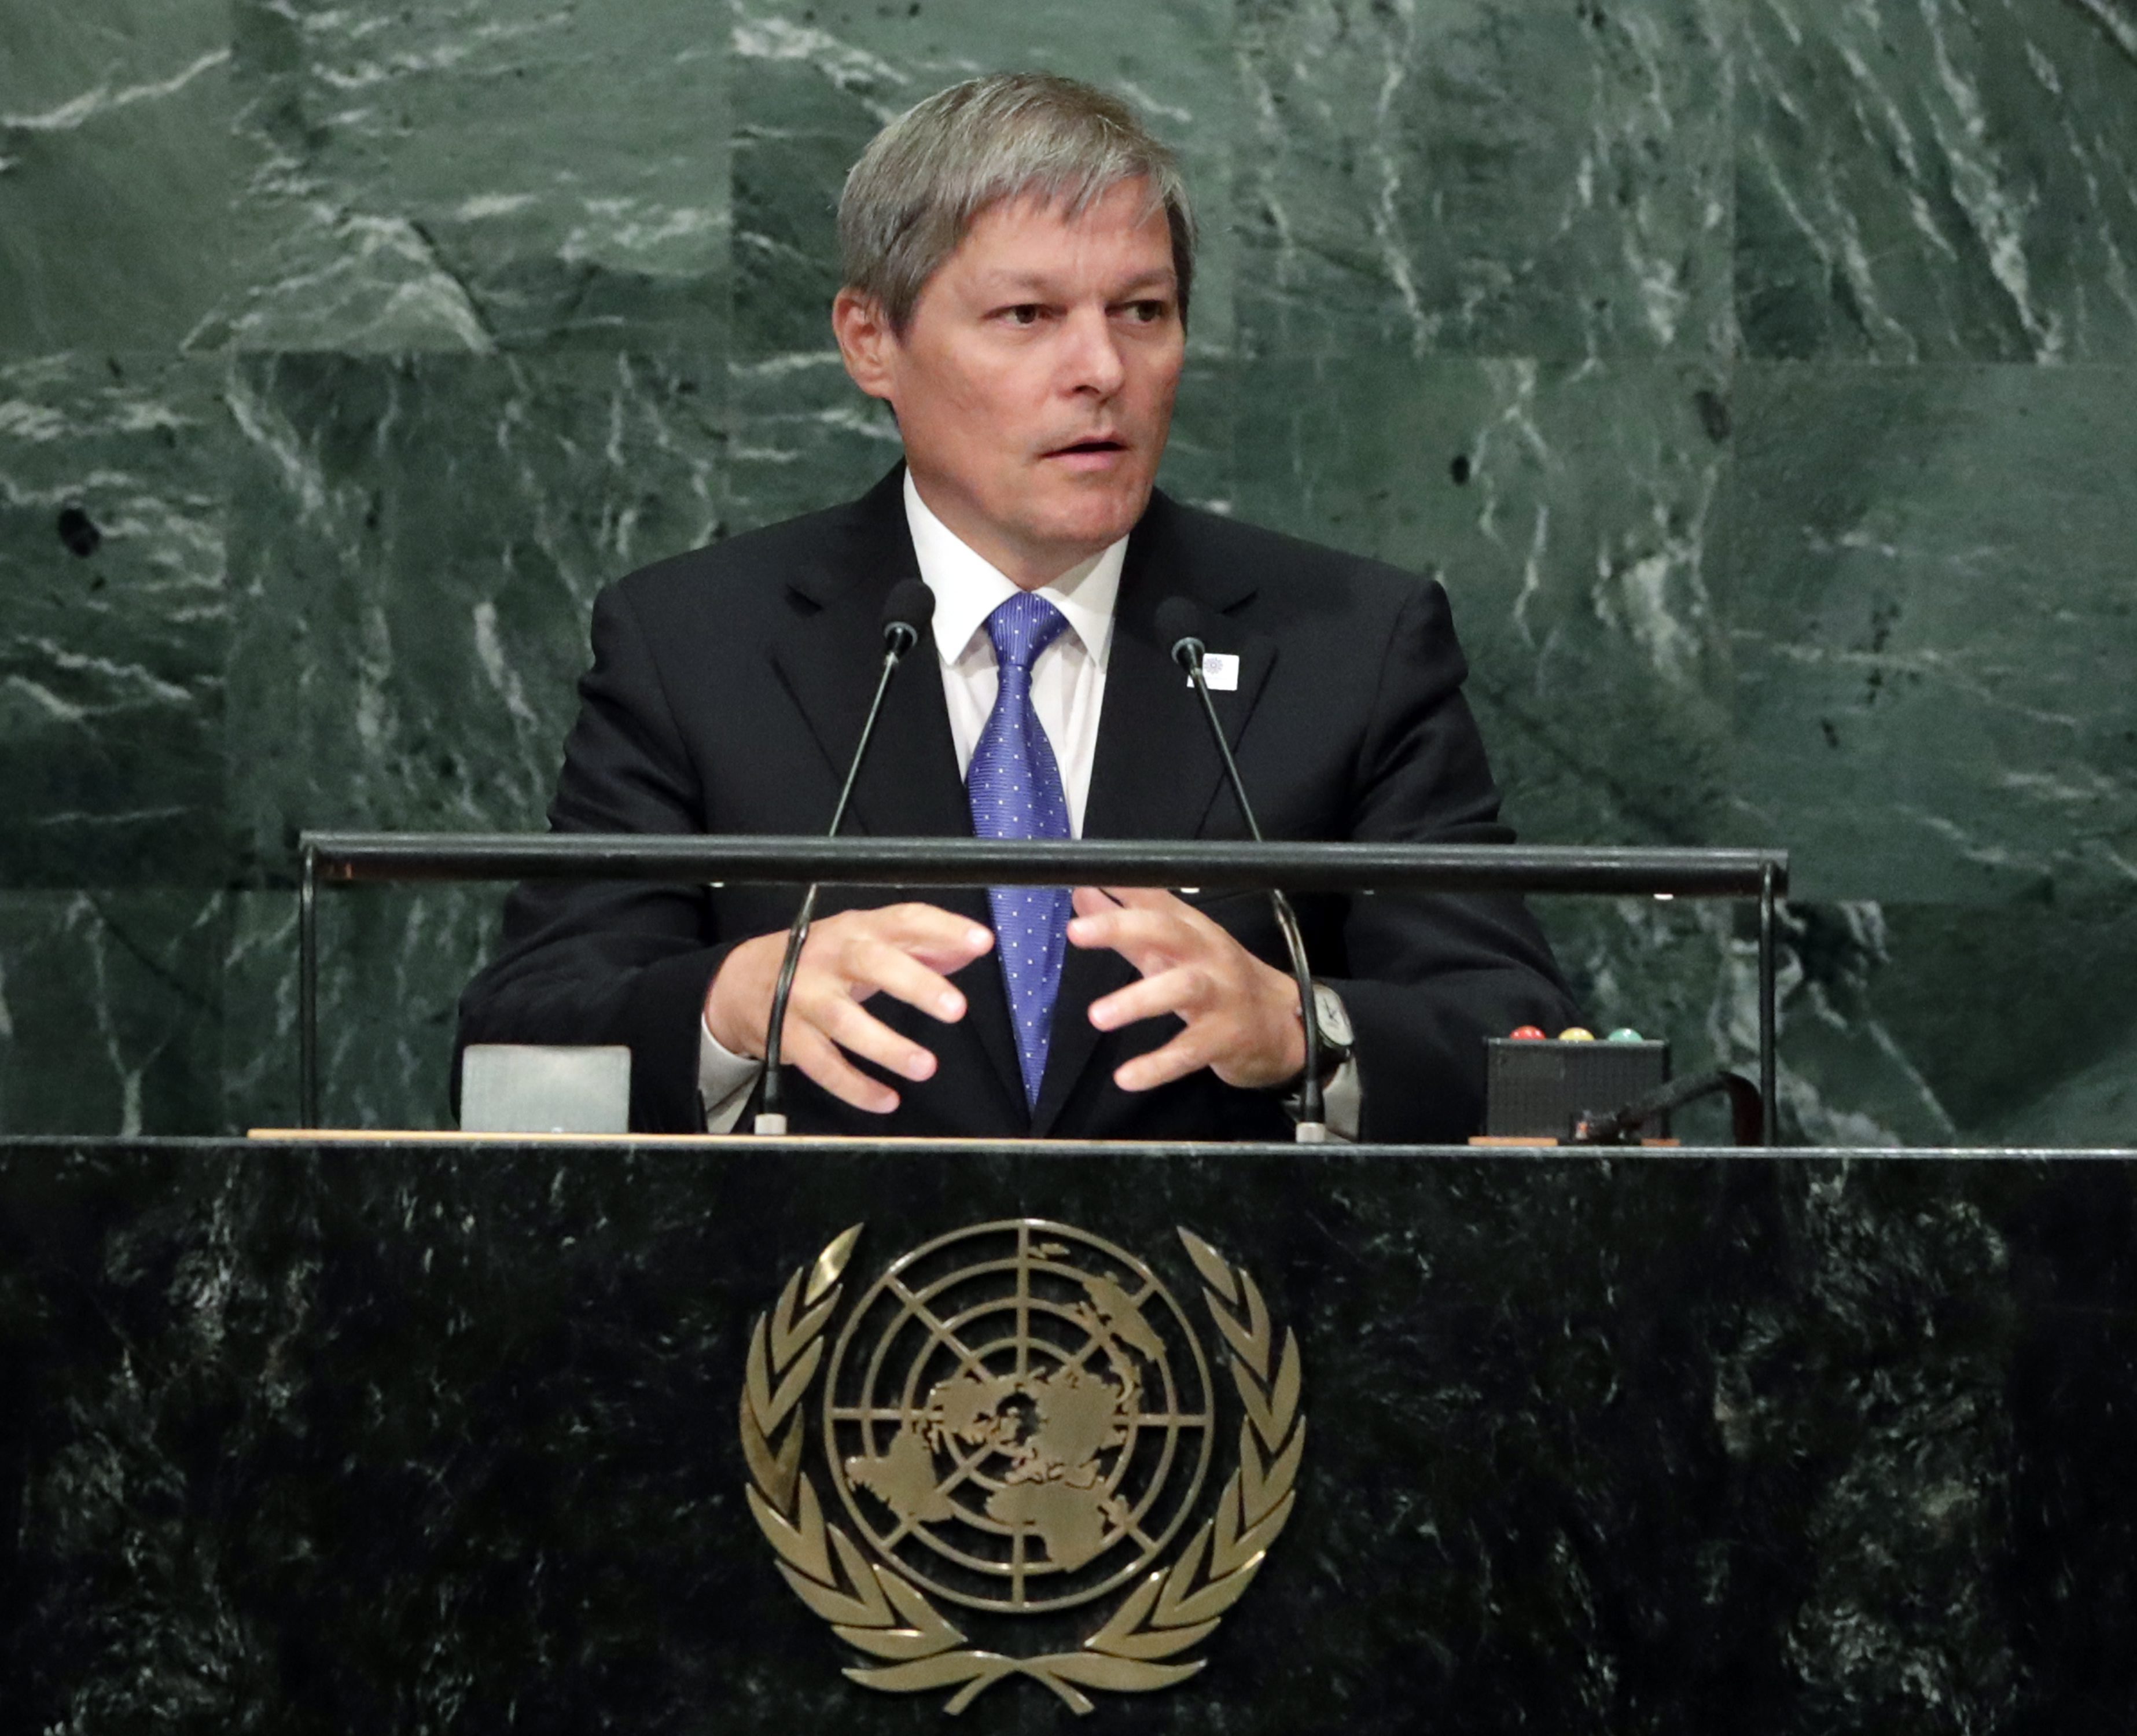 2016-09-21 11:20:18 epa05551342 Prime Minister of Romania Dacian Julien Ciolos addresses the General Debate of the 71st Session of the United Nations General Assembly at UN headquarters in New York, New York, USA, 21 September 2016. EPA/JASON SZENES